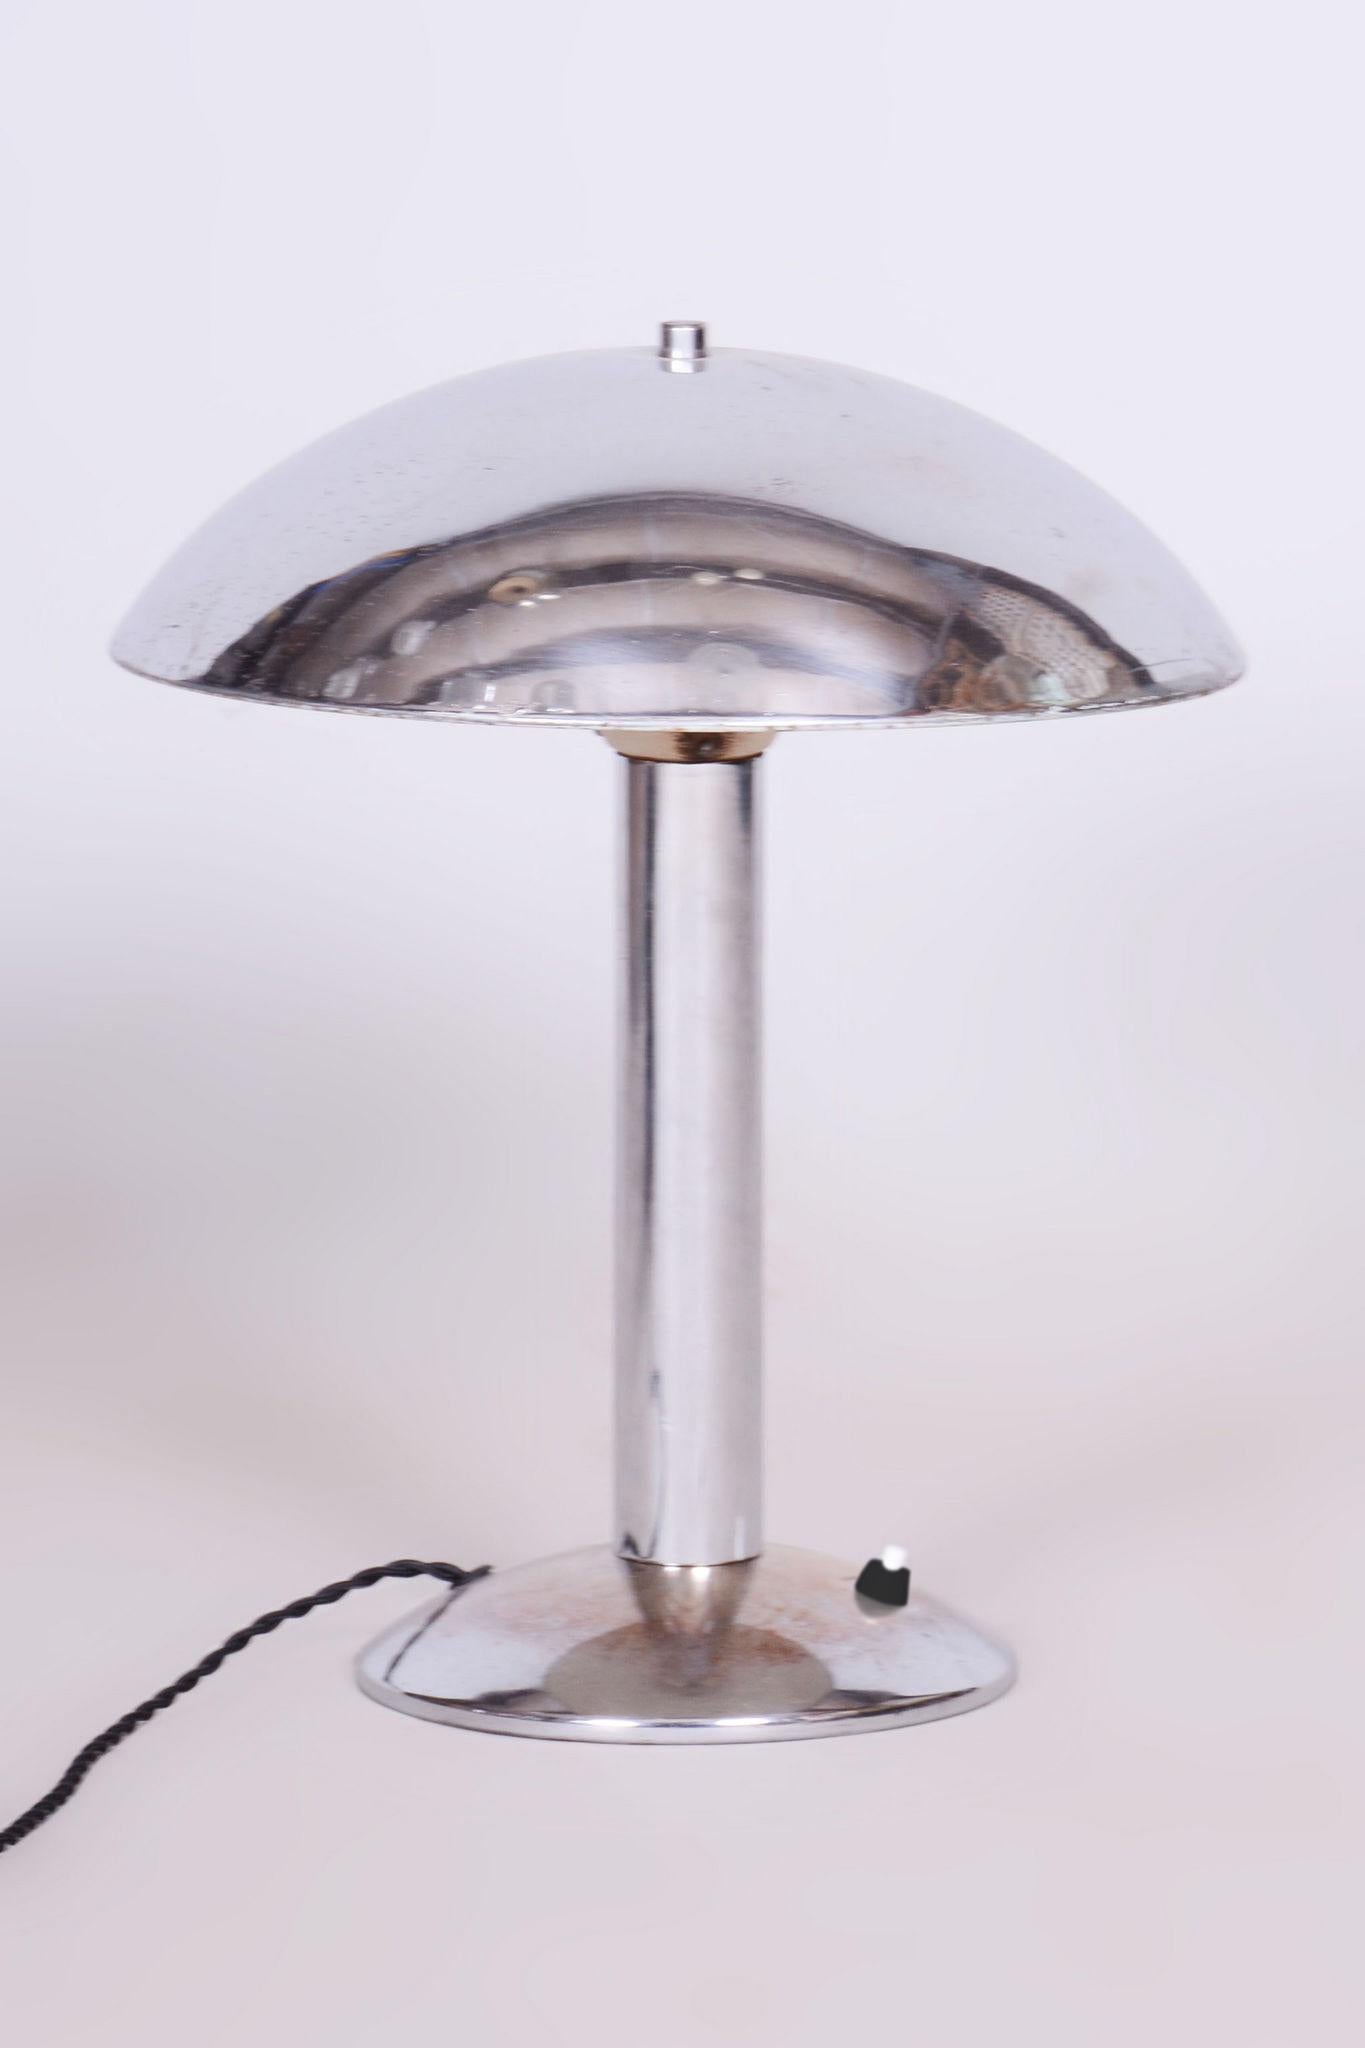 Restored Art Deco Table Lamp.

Material: Chrome-plated Steel
Source: Czech
Period: 1930-1939

The chrome parts have been cleaned and professionally restored. 

This item has new fully functioning electrification.

Made by Napako. The NAPAKO